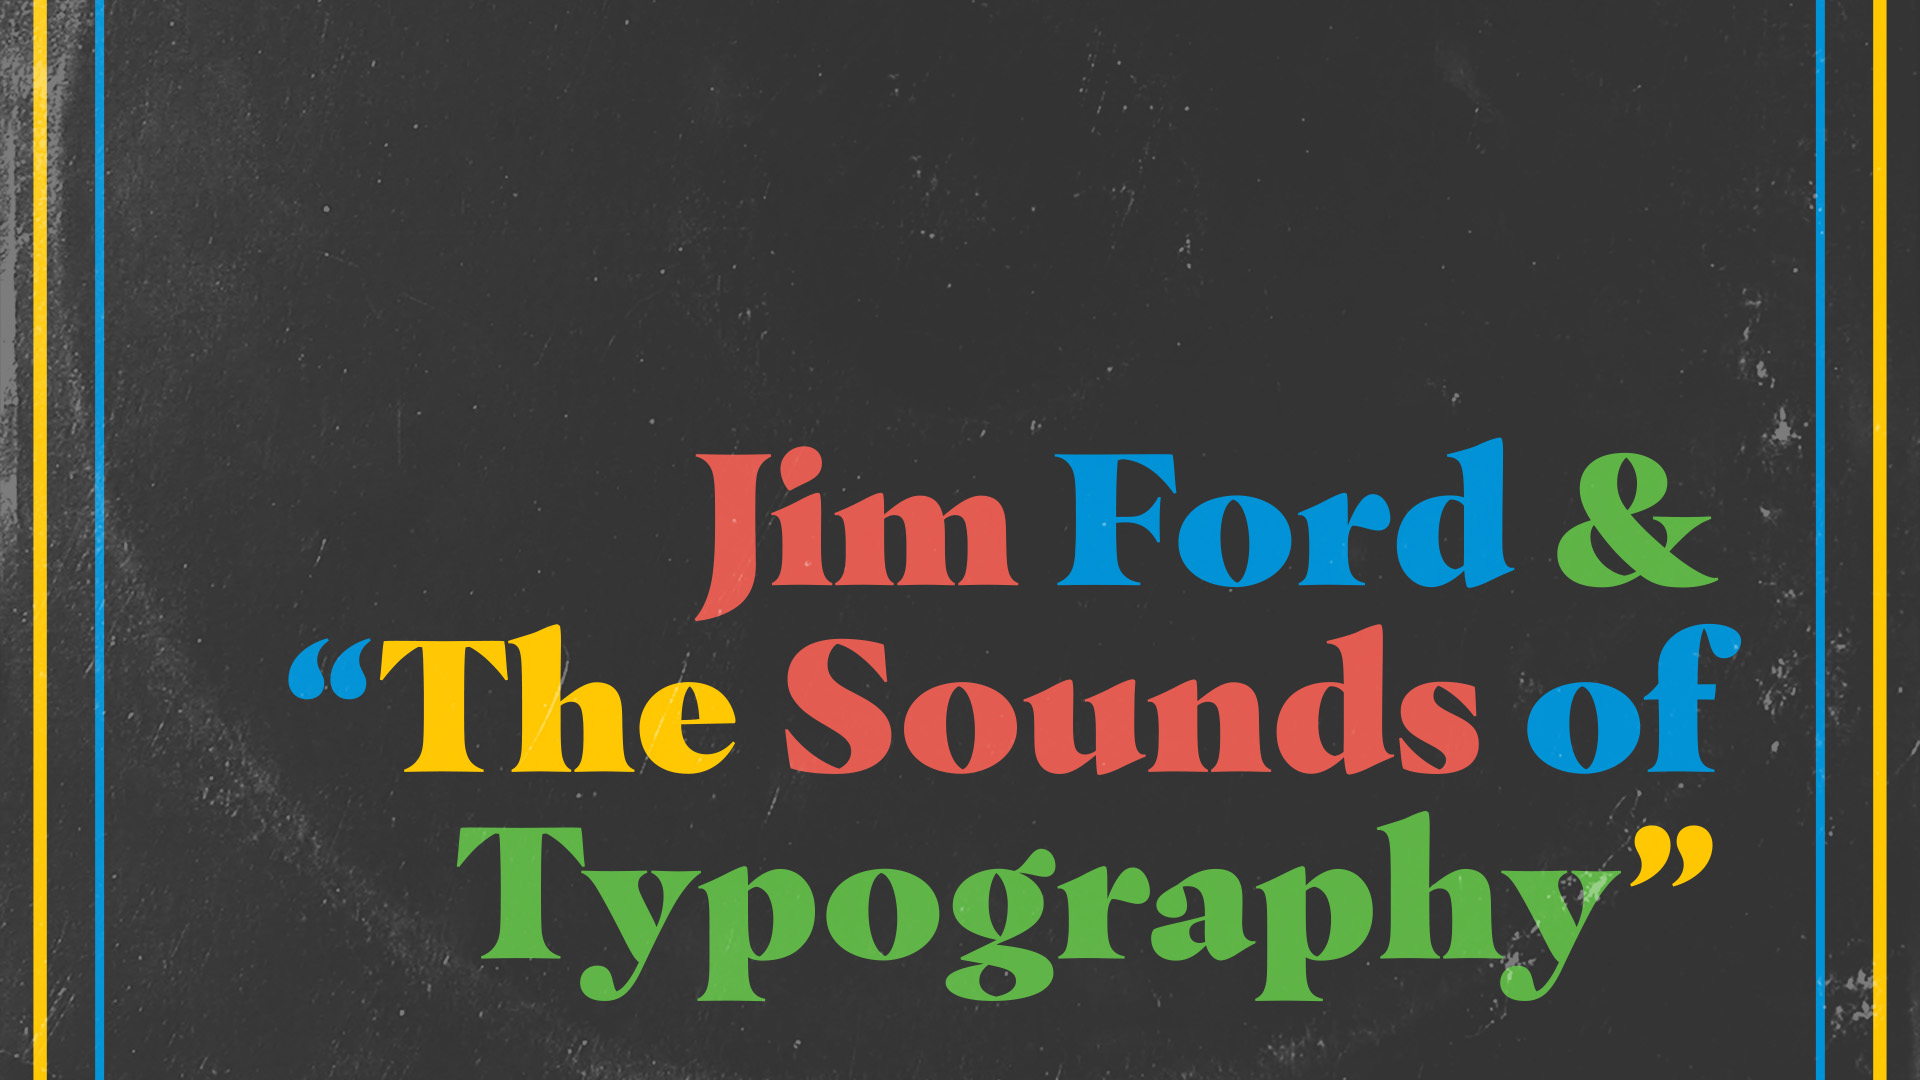 Jim Ford & “The Sounds of Typography”